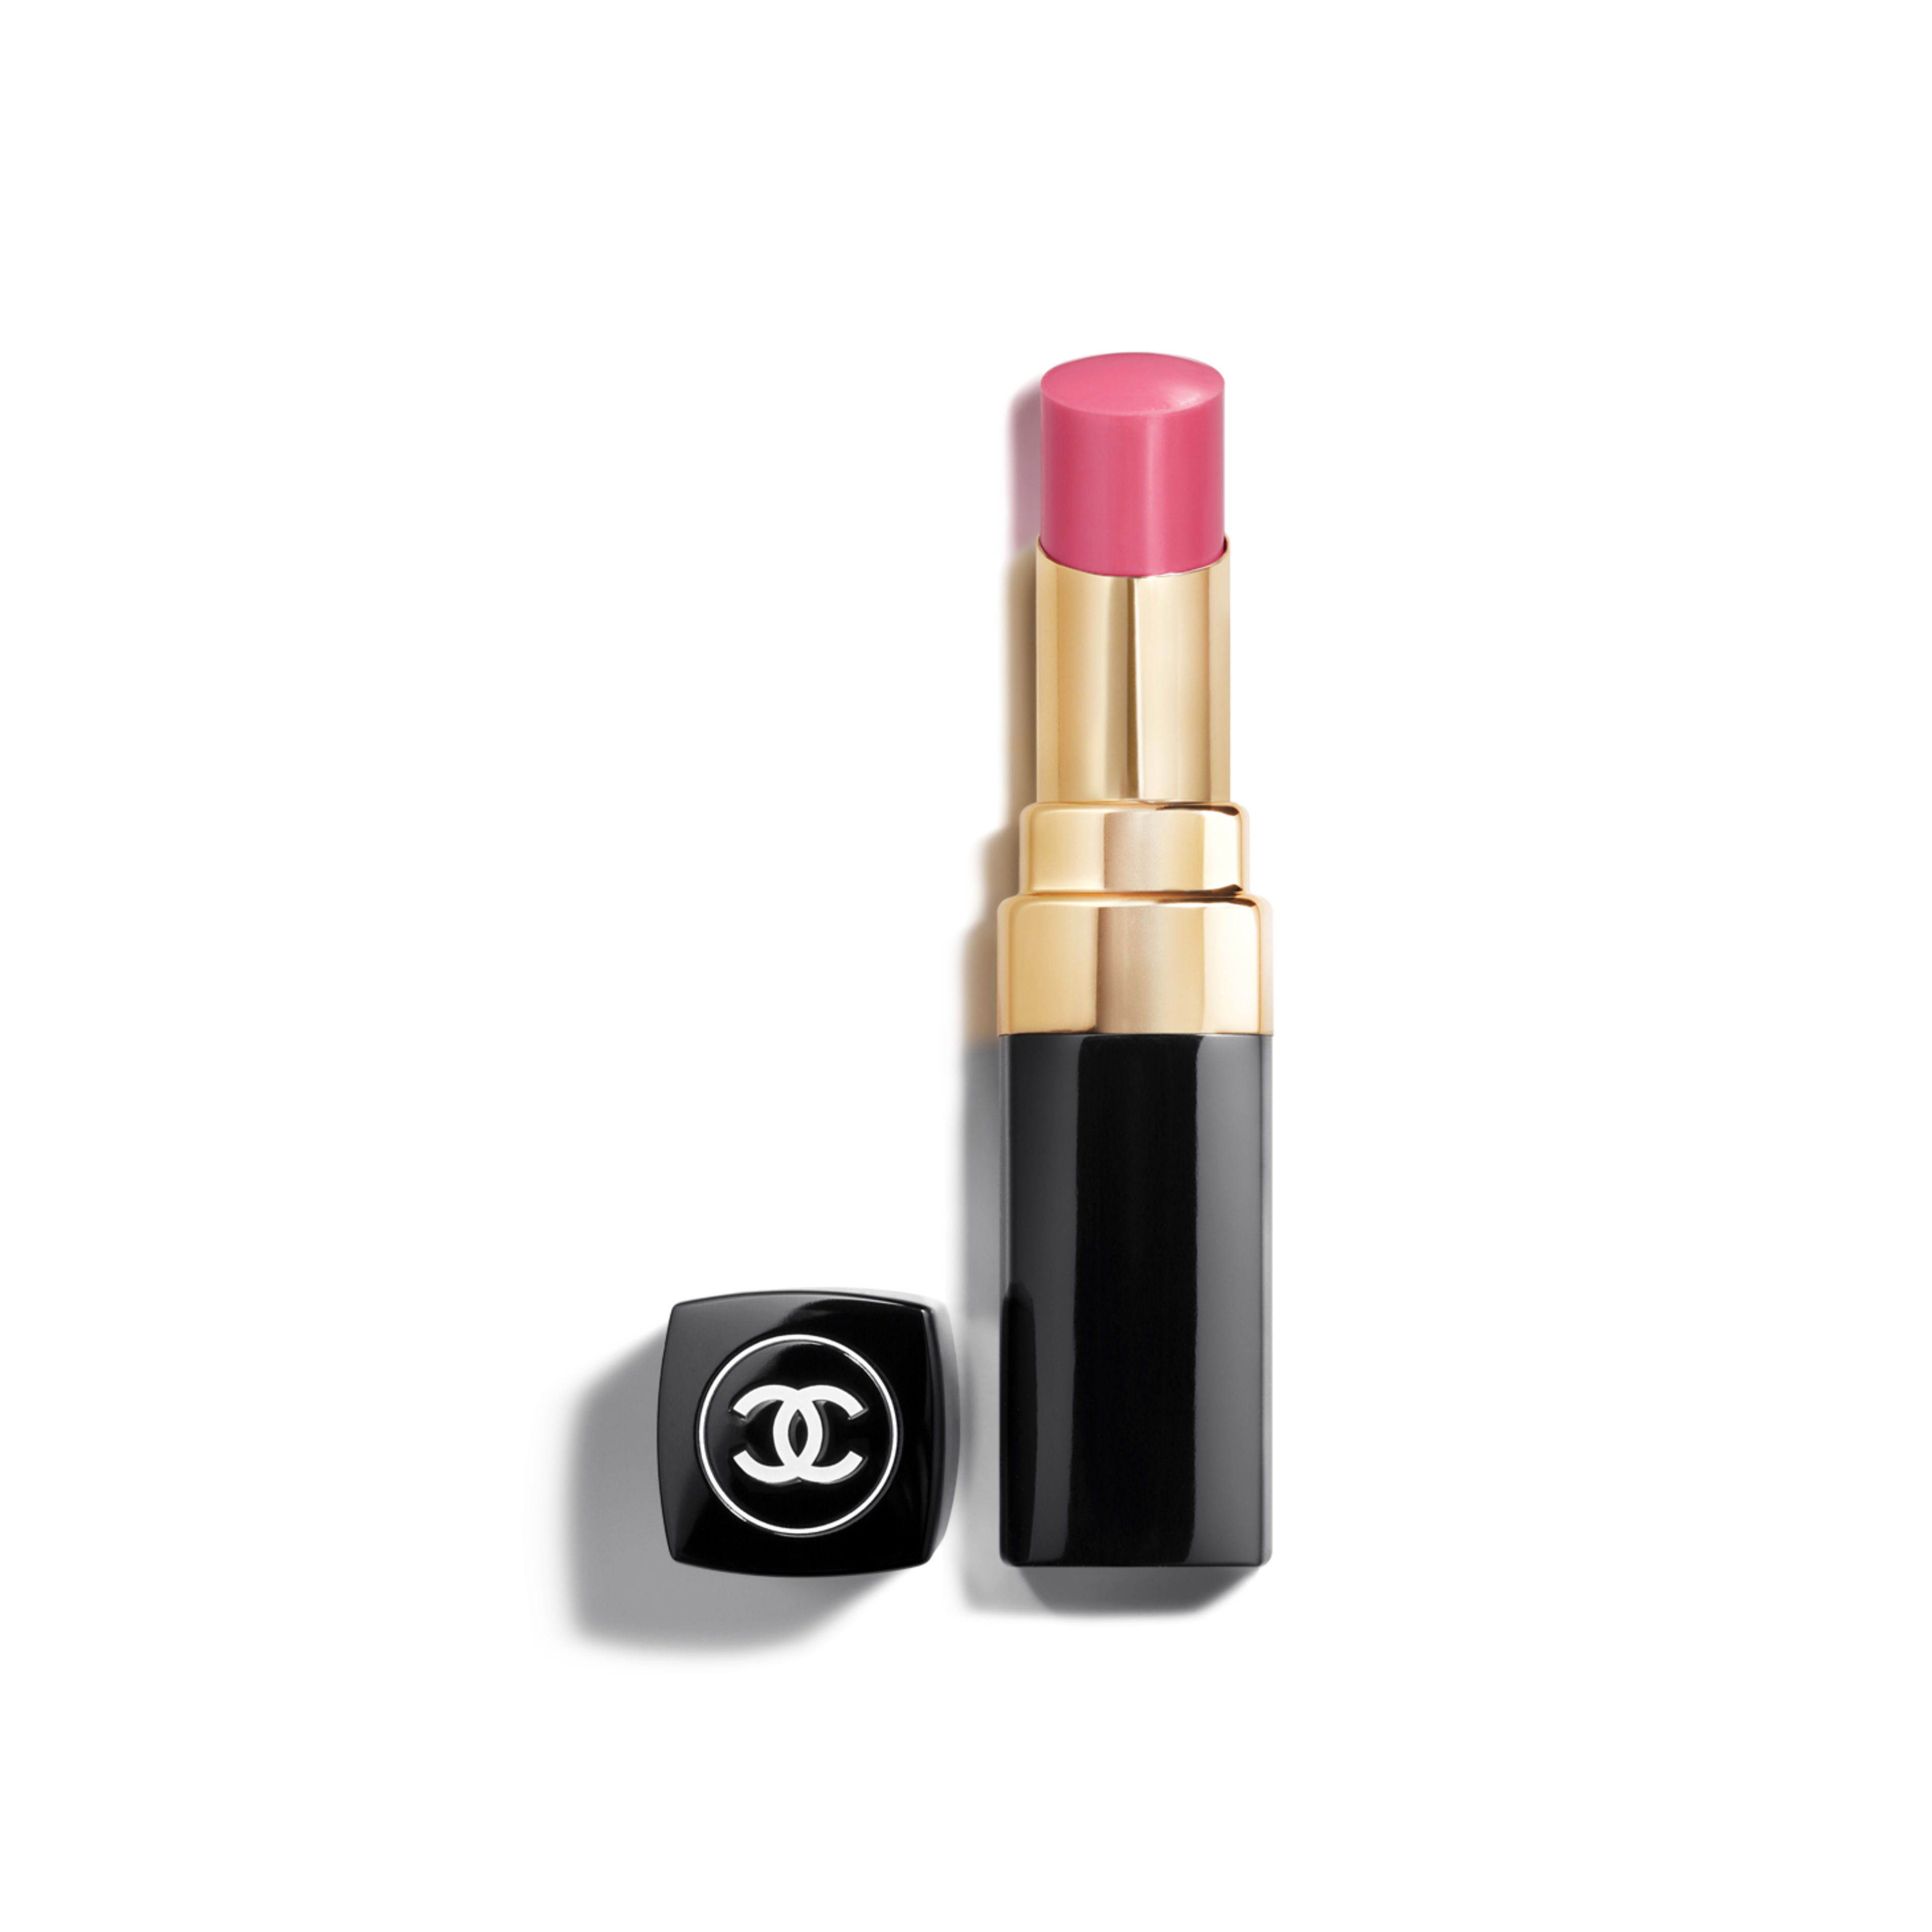 Chanel Rouge Coco Shine Lipstick - 8 Lipstick Trends for 2018 - Know Popular Lip Colors with Reviews & Price